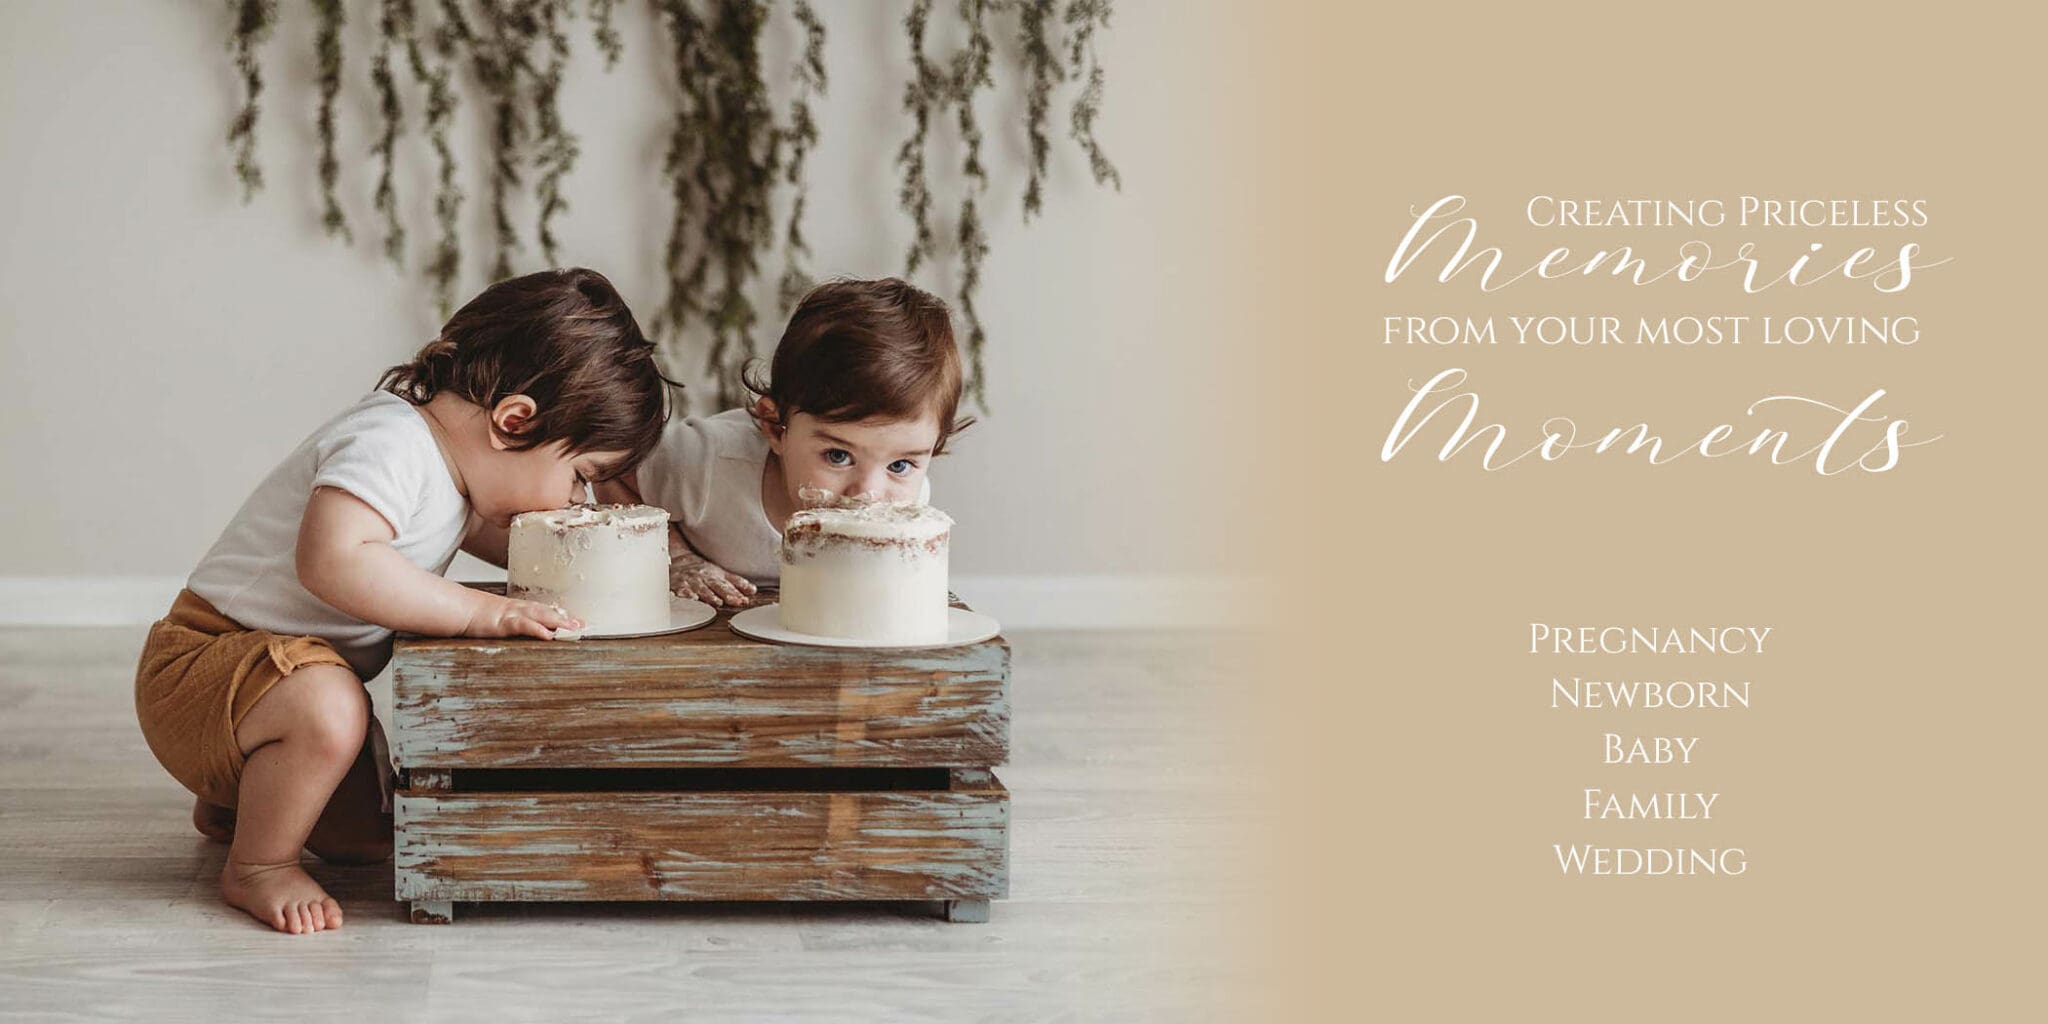 Twin baby boys eating their birthday cakes from a wooden crate in a bright Sydney studio